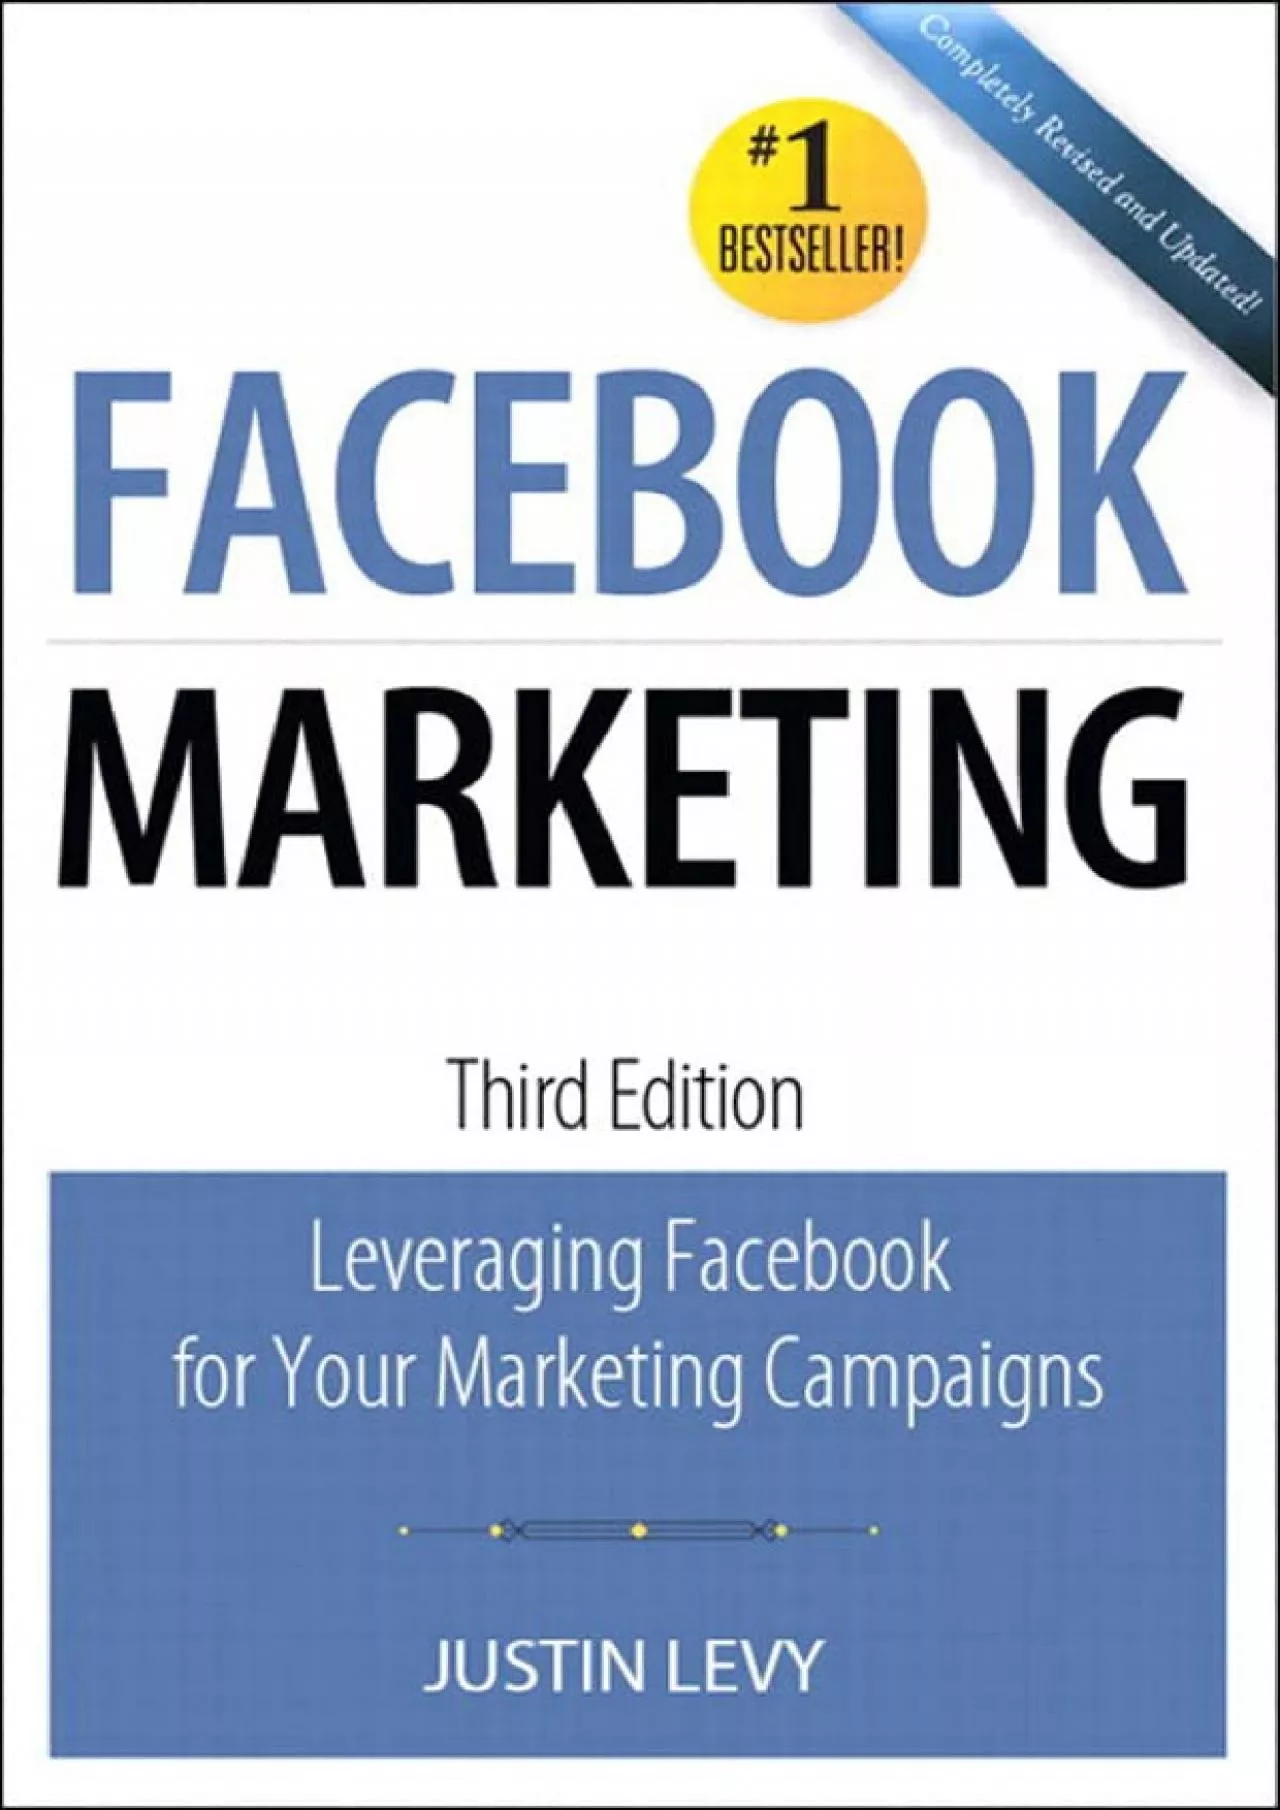 Facebook Marketing: Leveraging Facebook\'s Features for Your Marketing Campaigns (Que